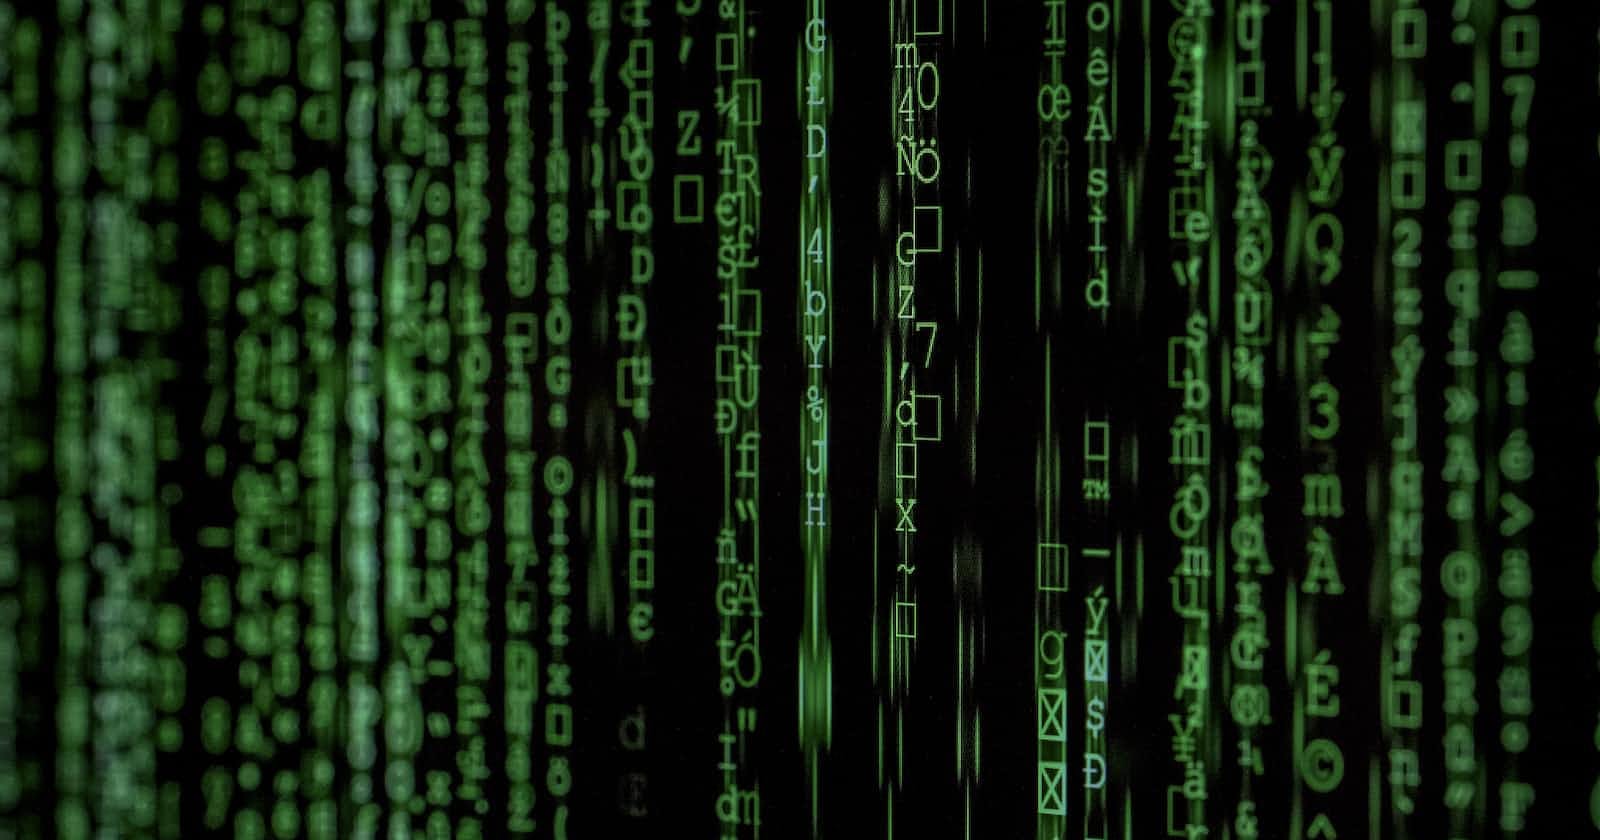 The Matrix Is Everywhere: Linear Algebra Concepts Relevant to Computer Science